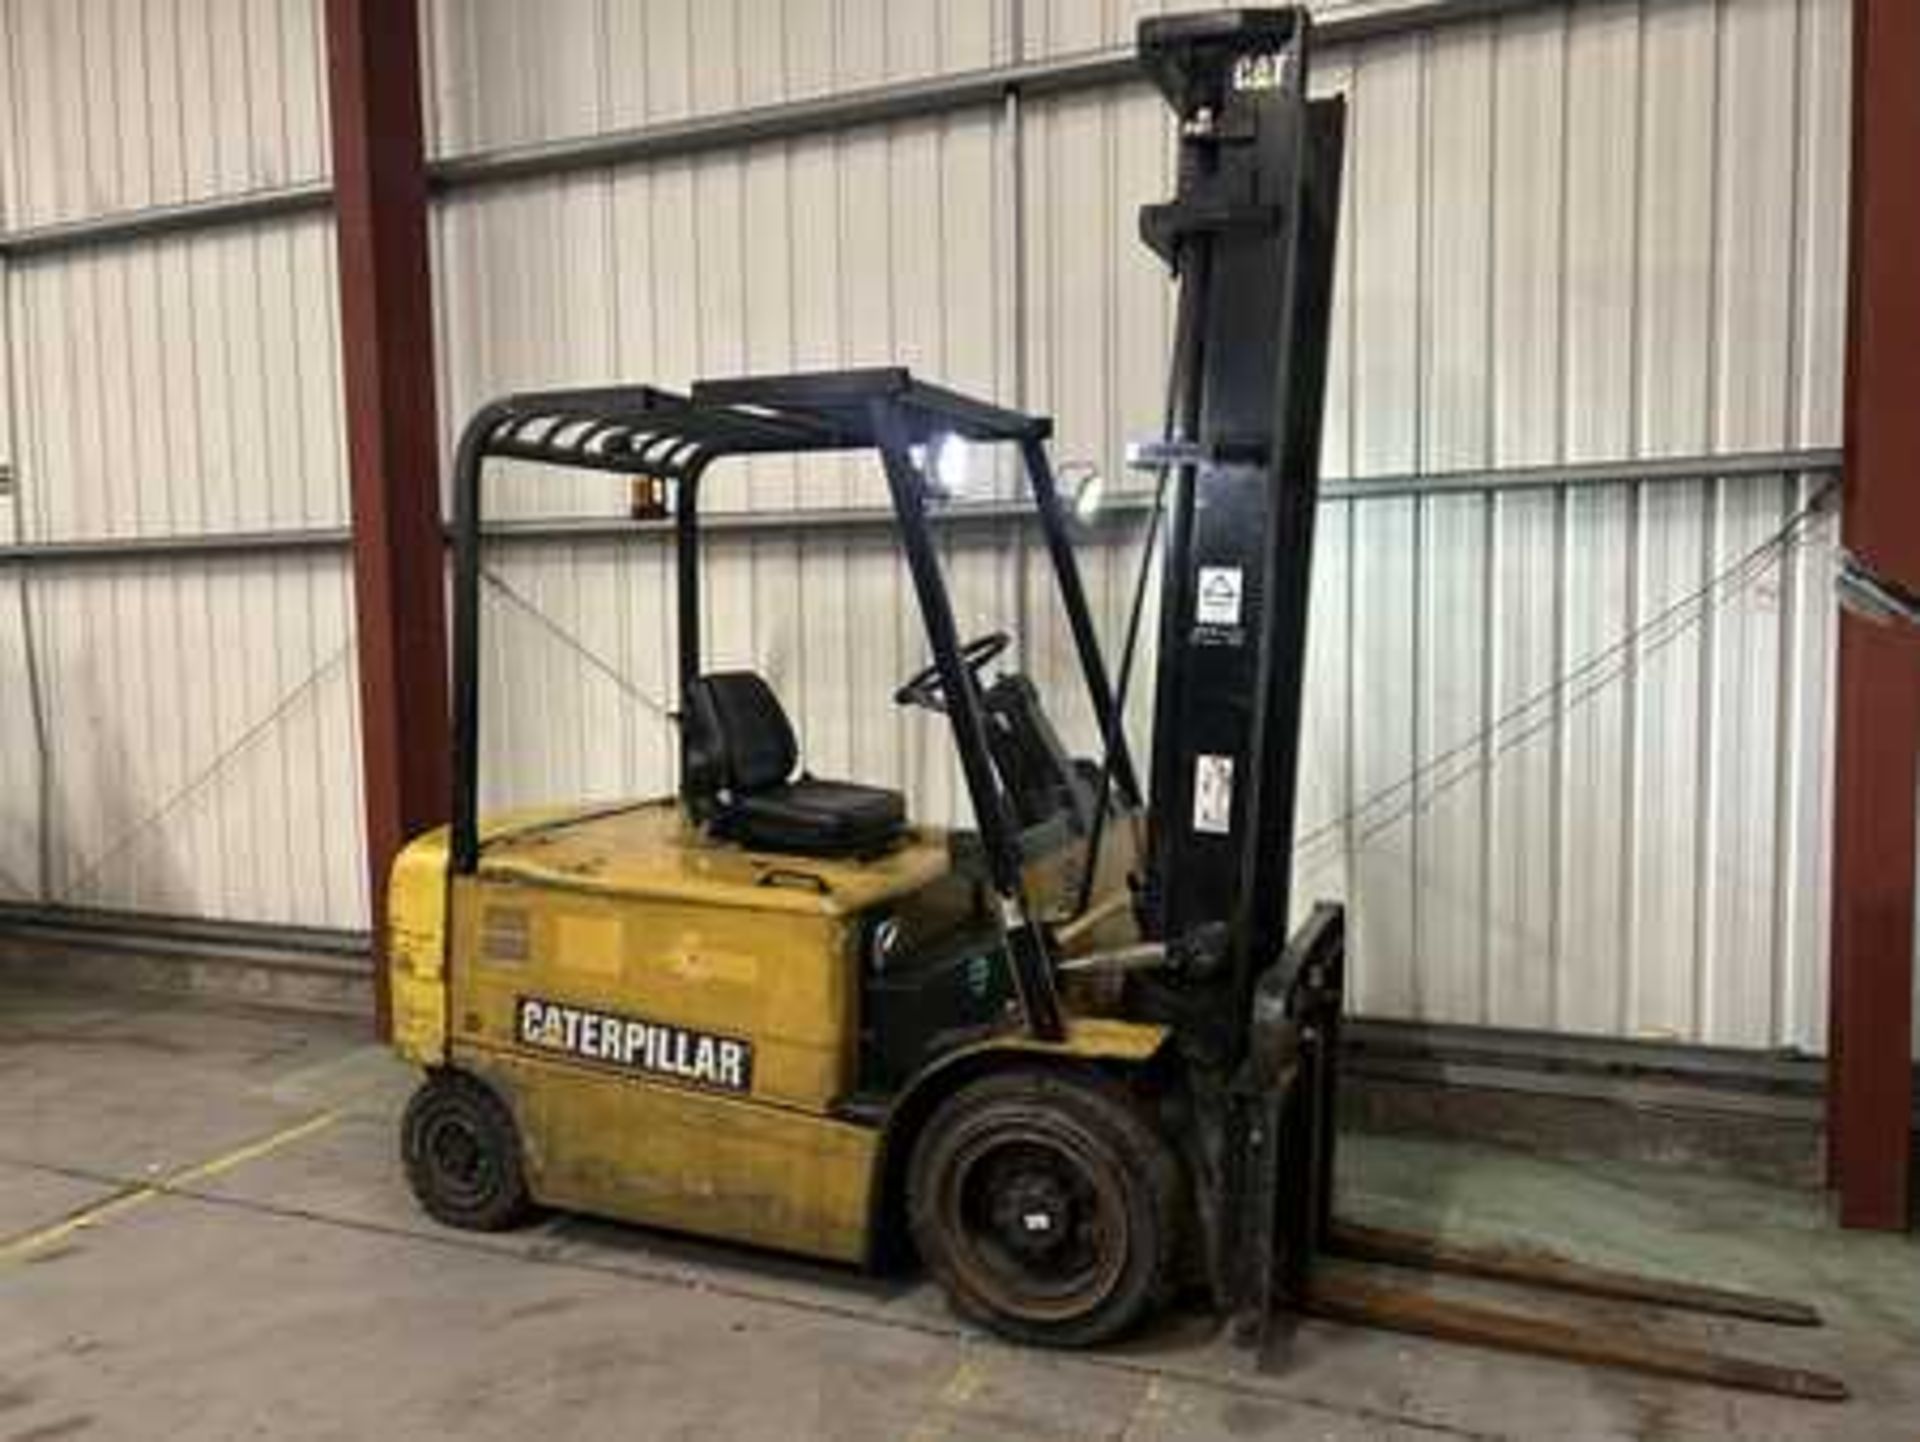 CAT ELECTRIC FORKLIFT - EP35K-PAC, 2014 - Image 4 of 6